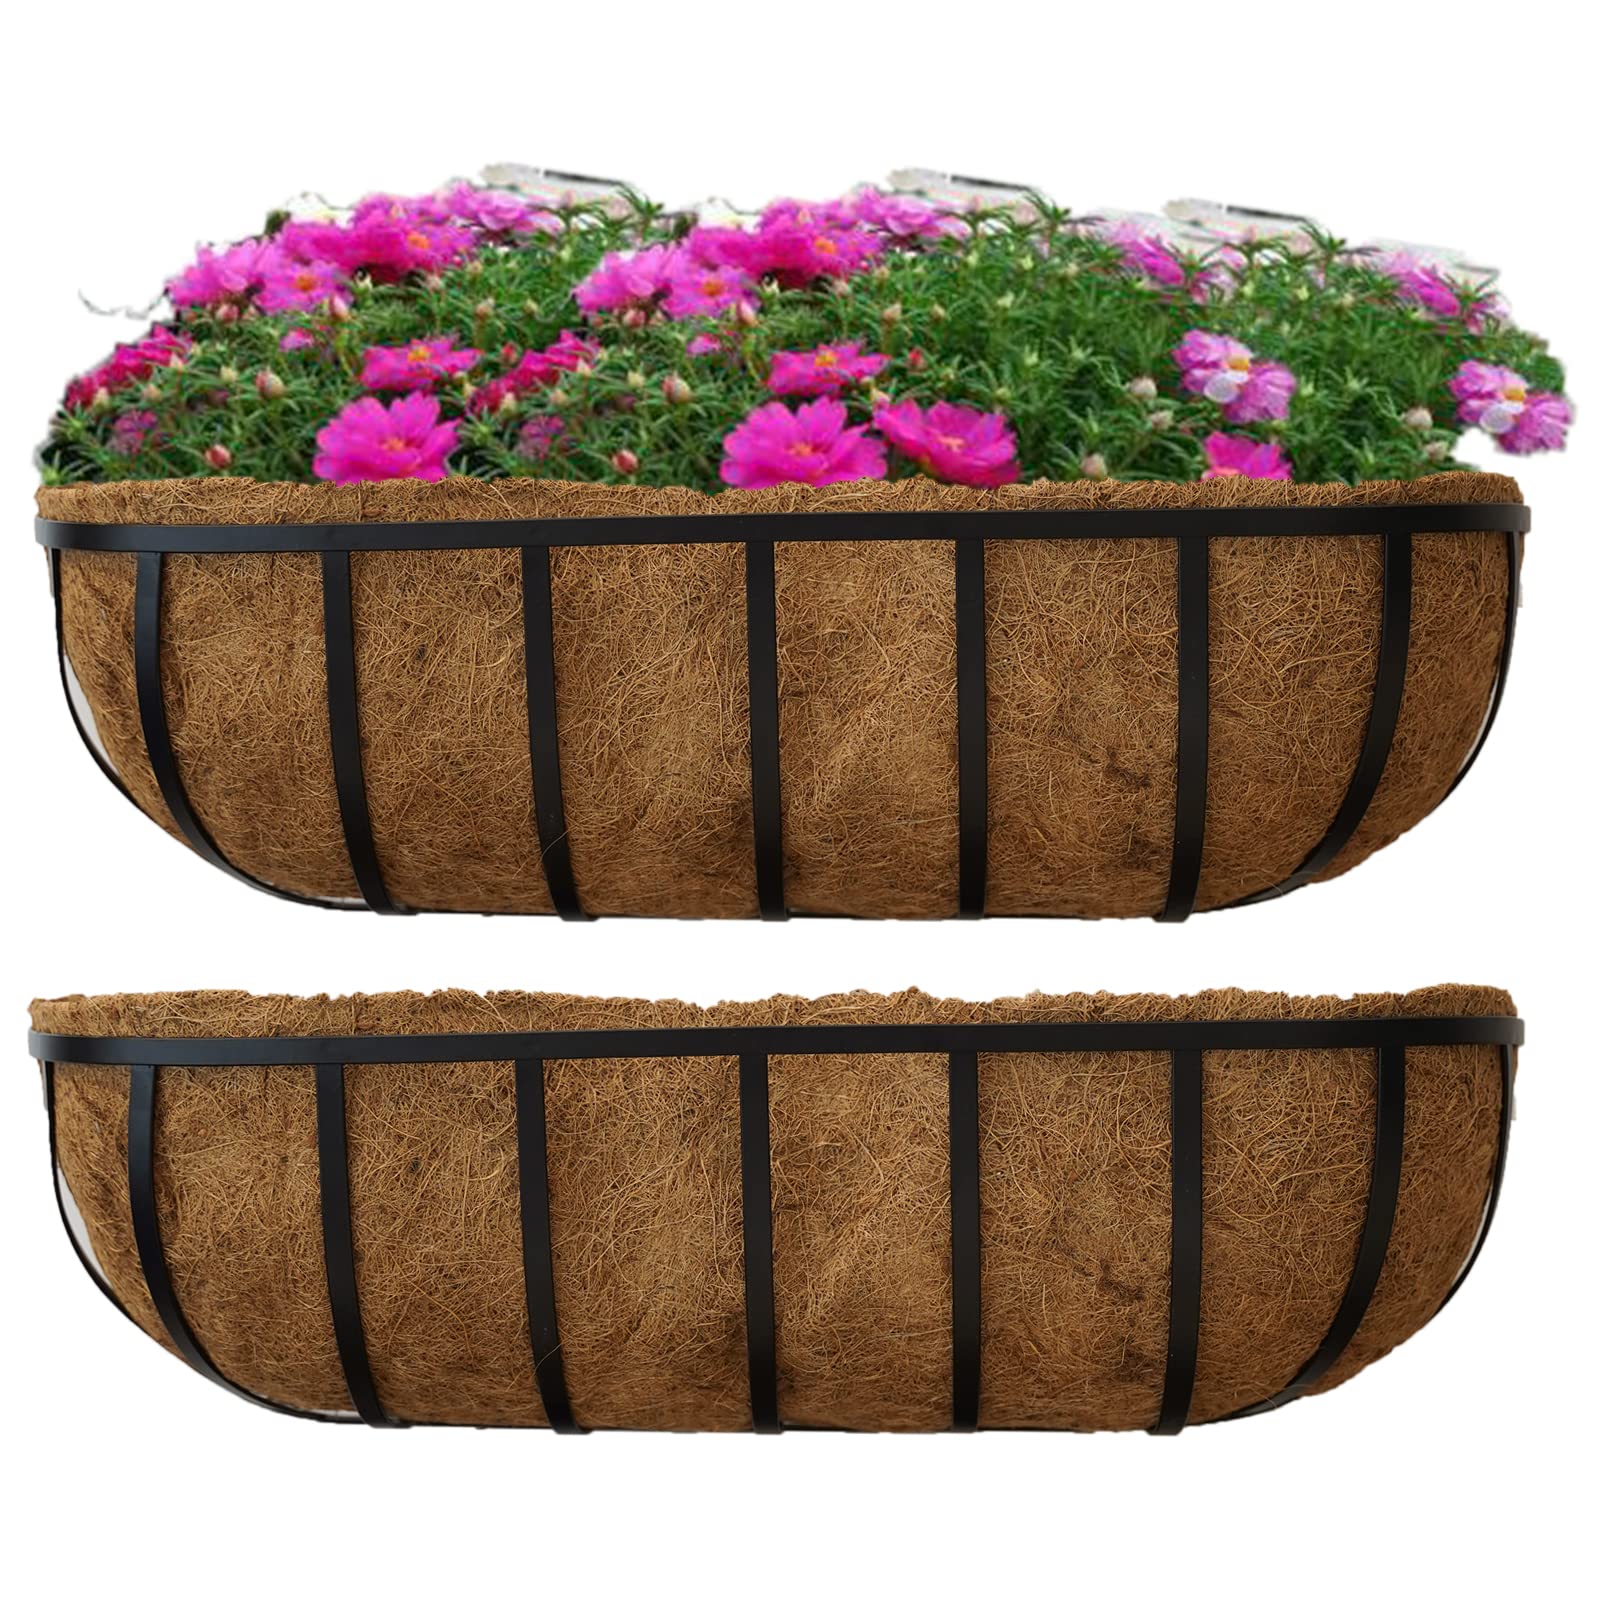 Frillybutts Planter Box for Deck Railing